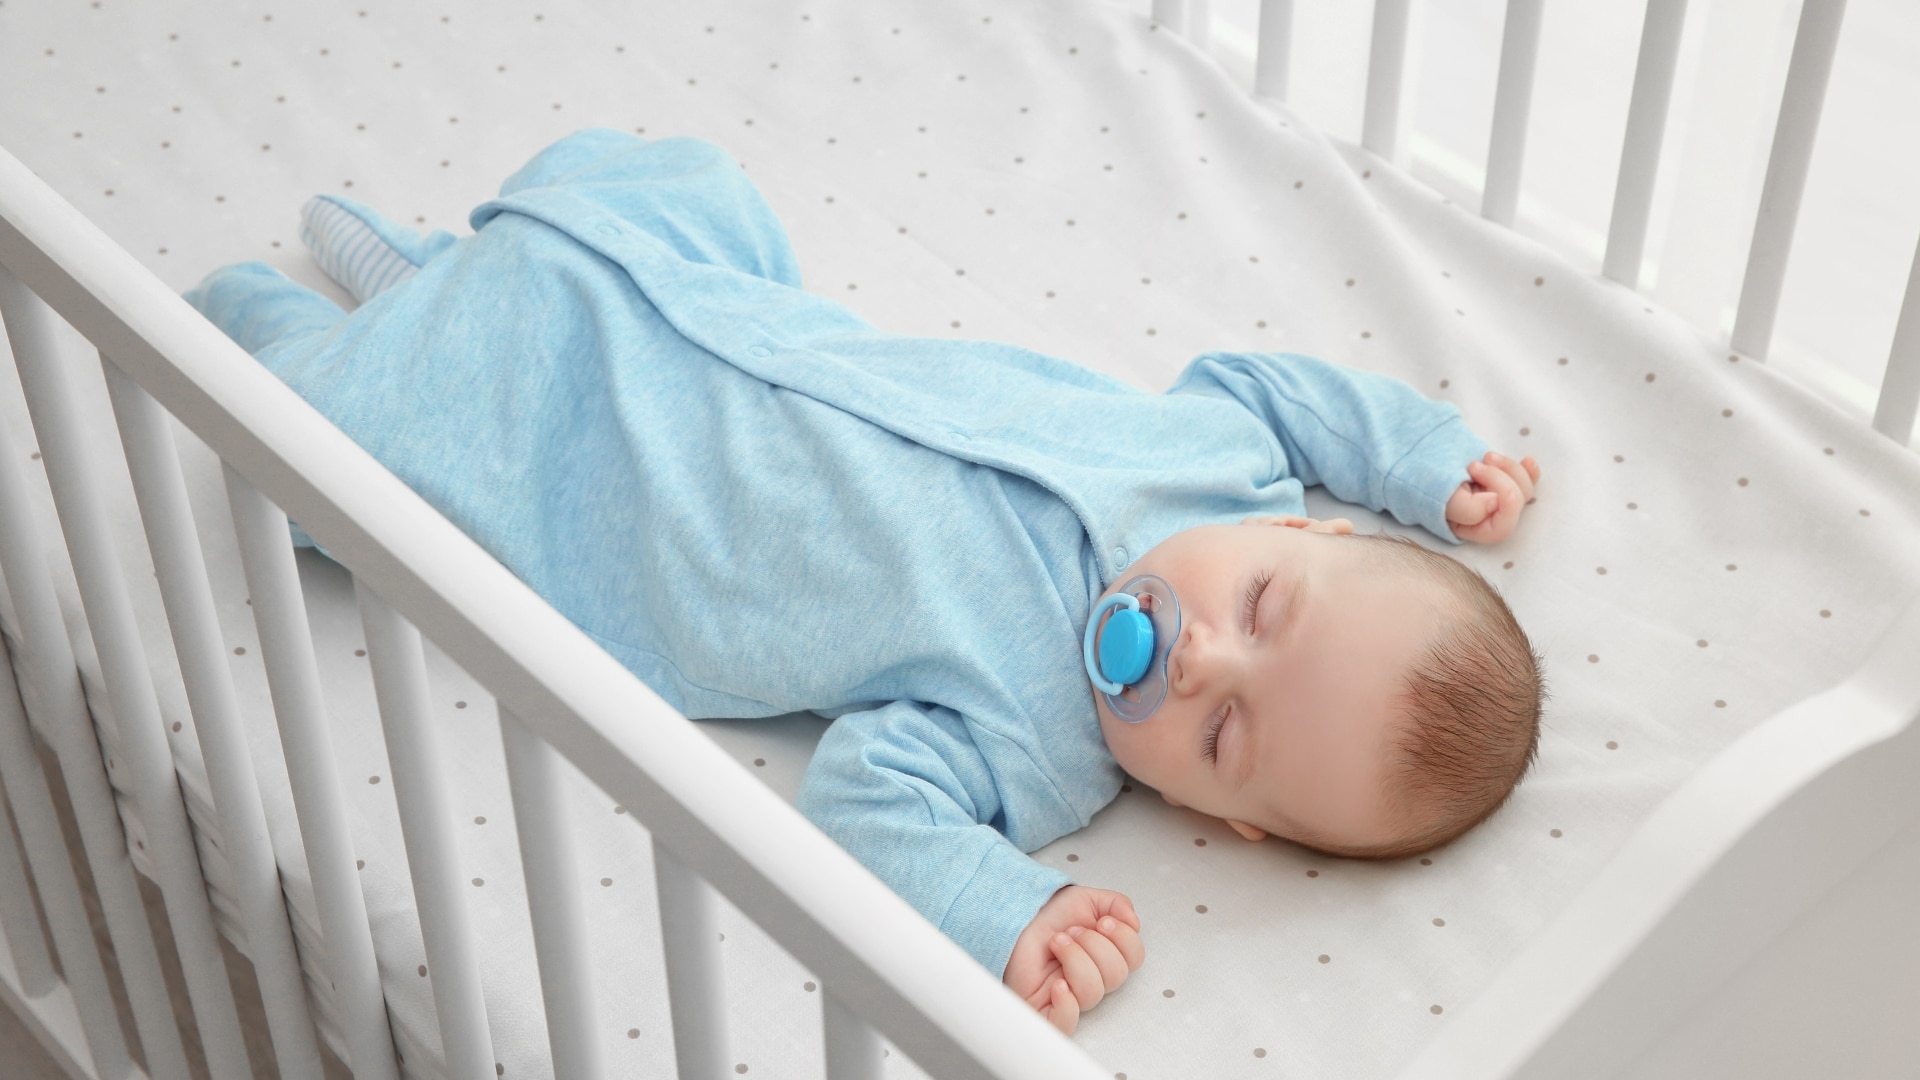 Can Baby Sleep With Pacifier? Is It Dangerous? Is It Safe?